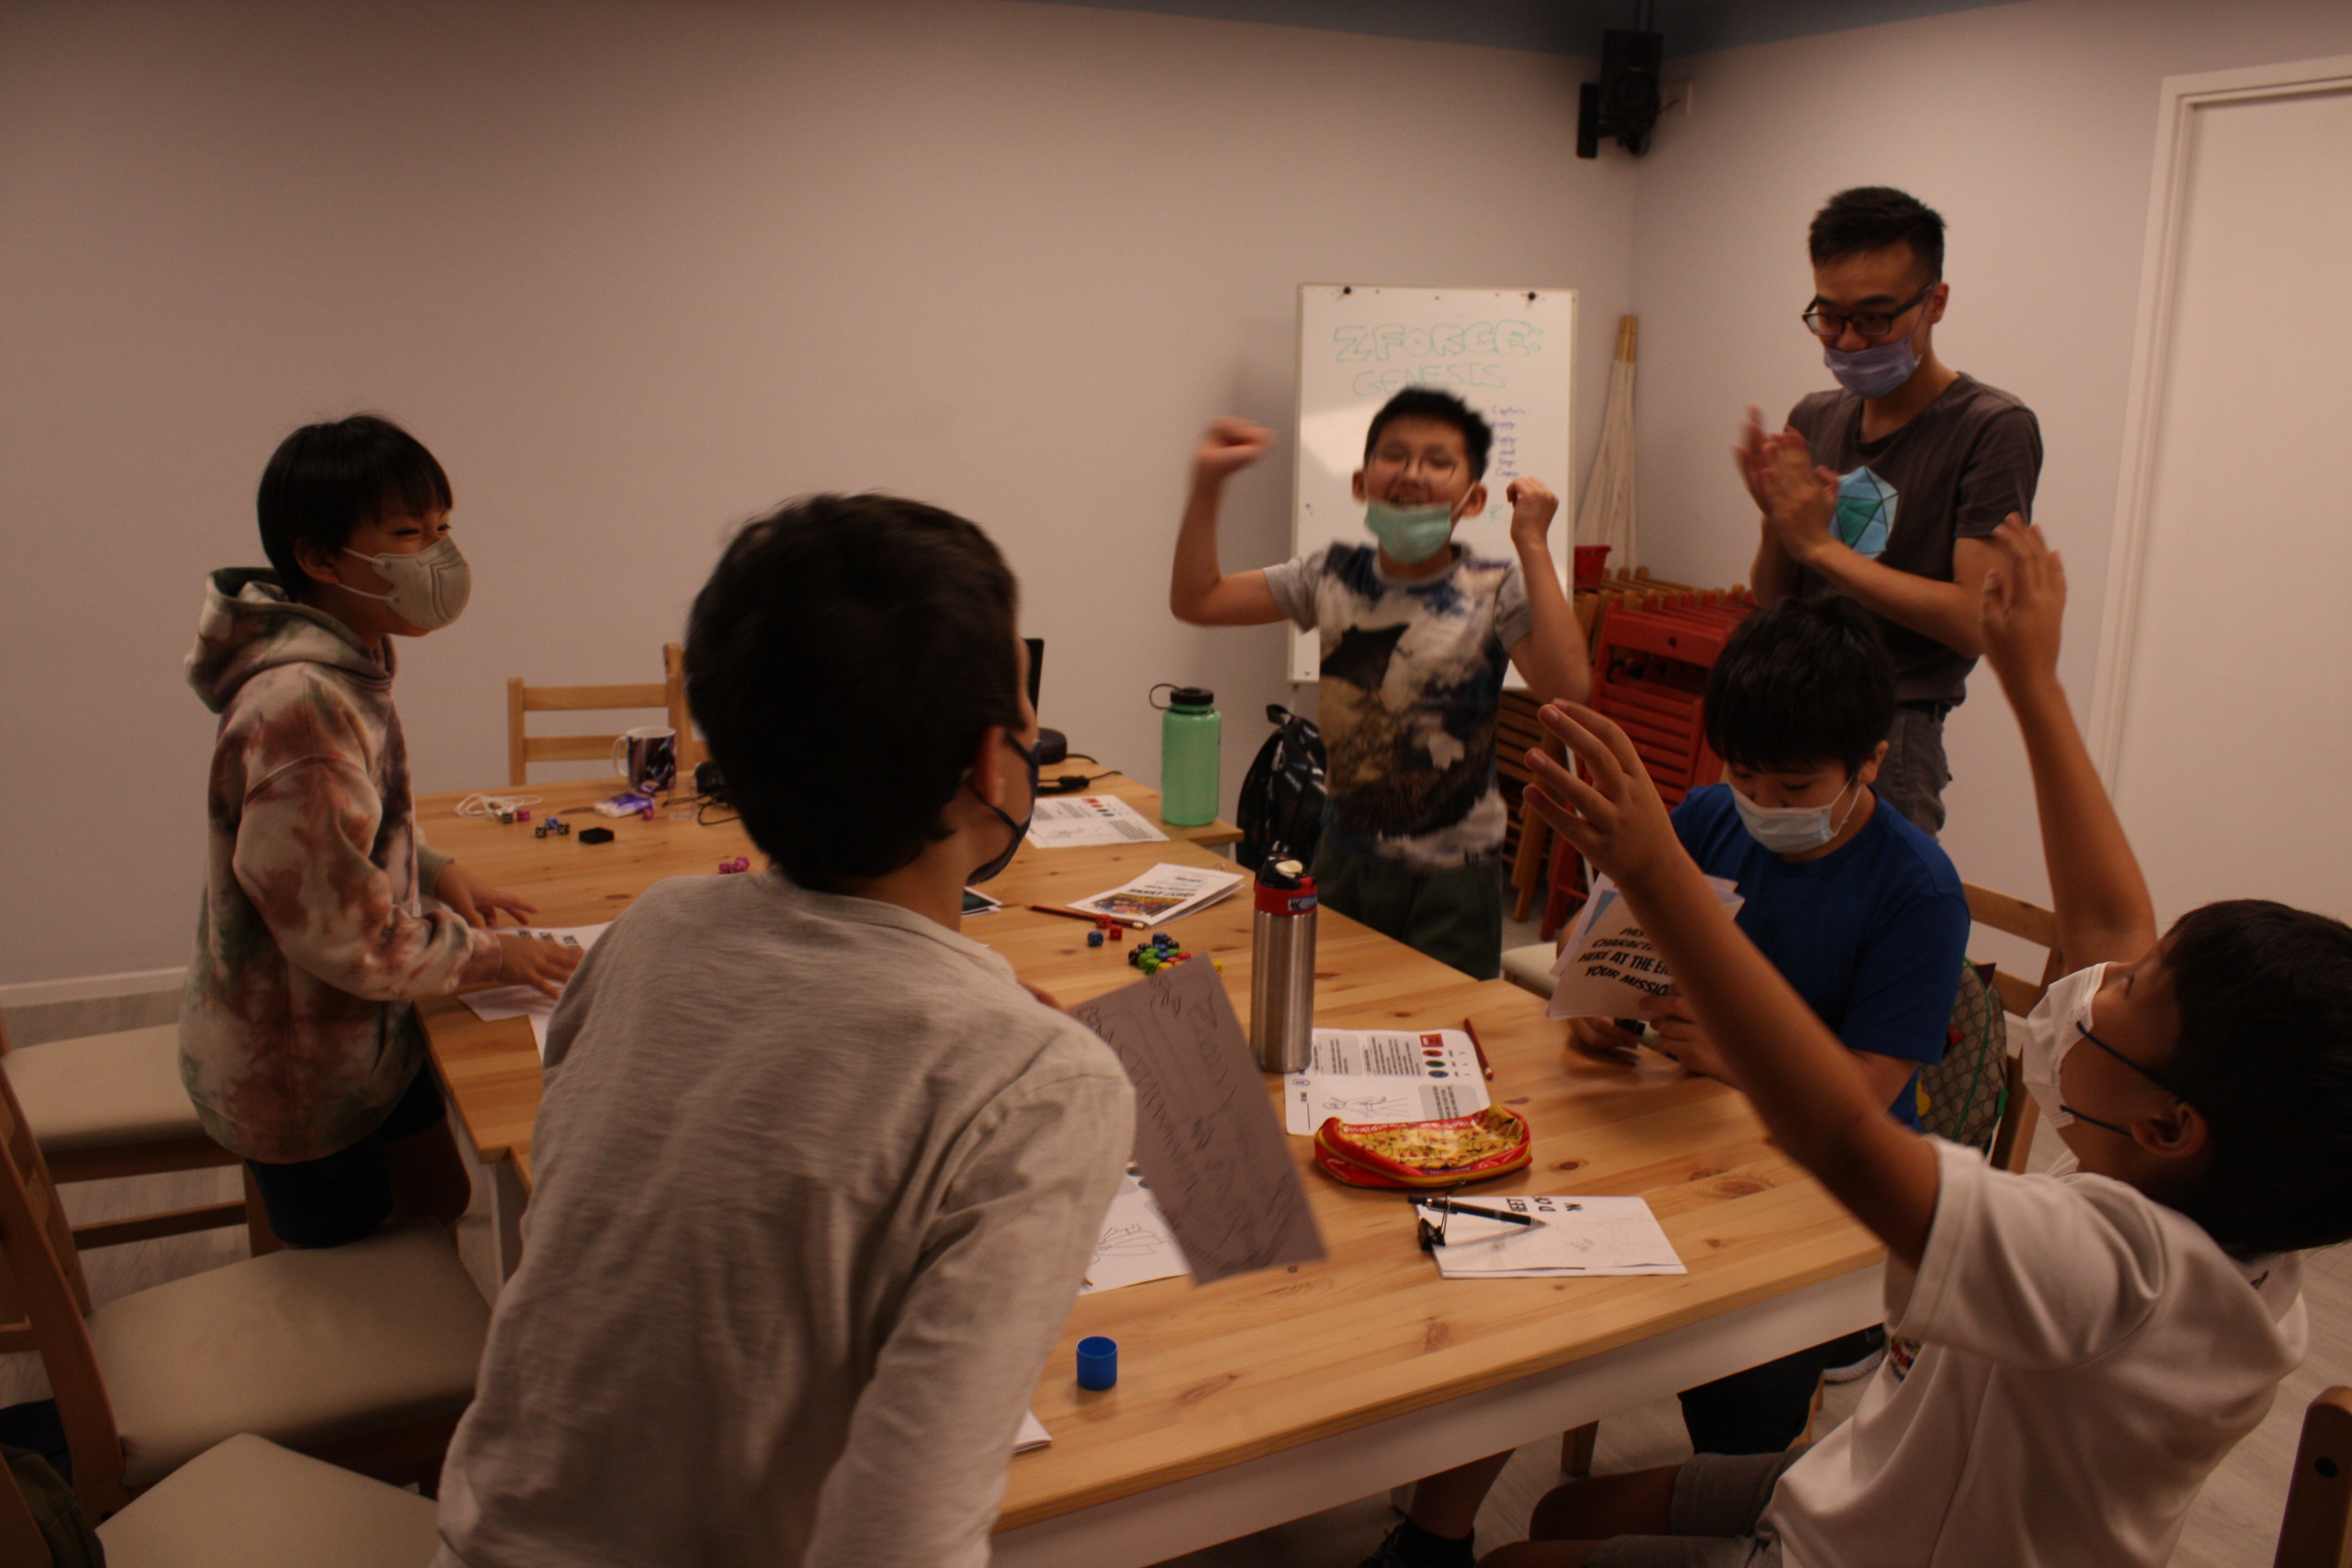 While delivering curriculum, always start with an expansive fun-first experience. Photo from King of Hong Kong, a journalism program for ages 8-11.